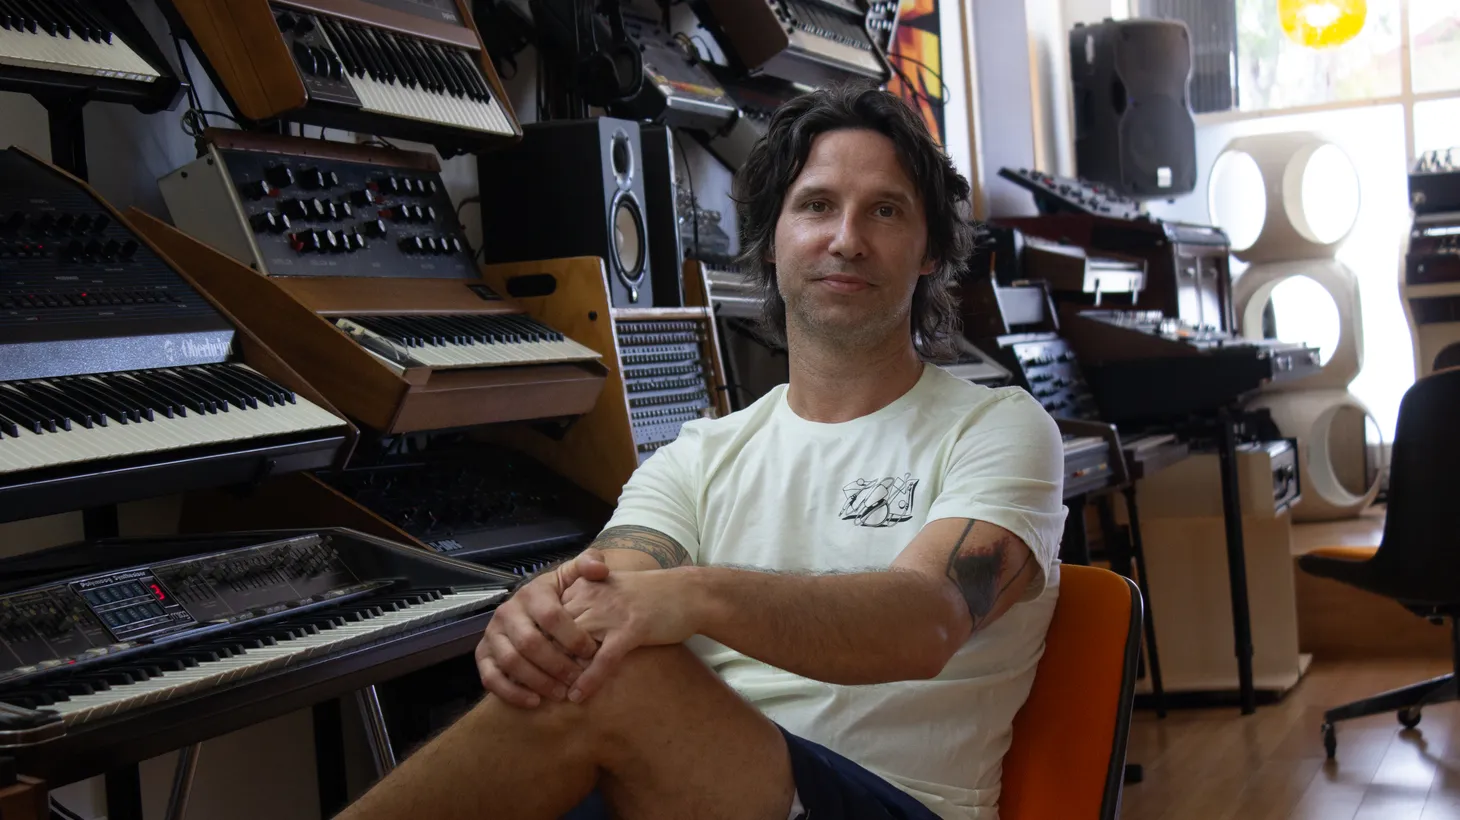 Lance Hill founded the Vintage Synthesizer Museum in 2013. It’s open for events and studio sessions.